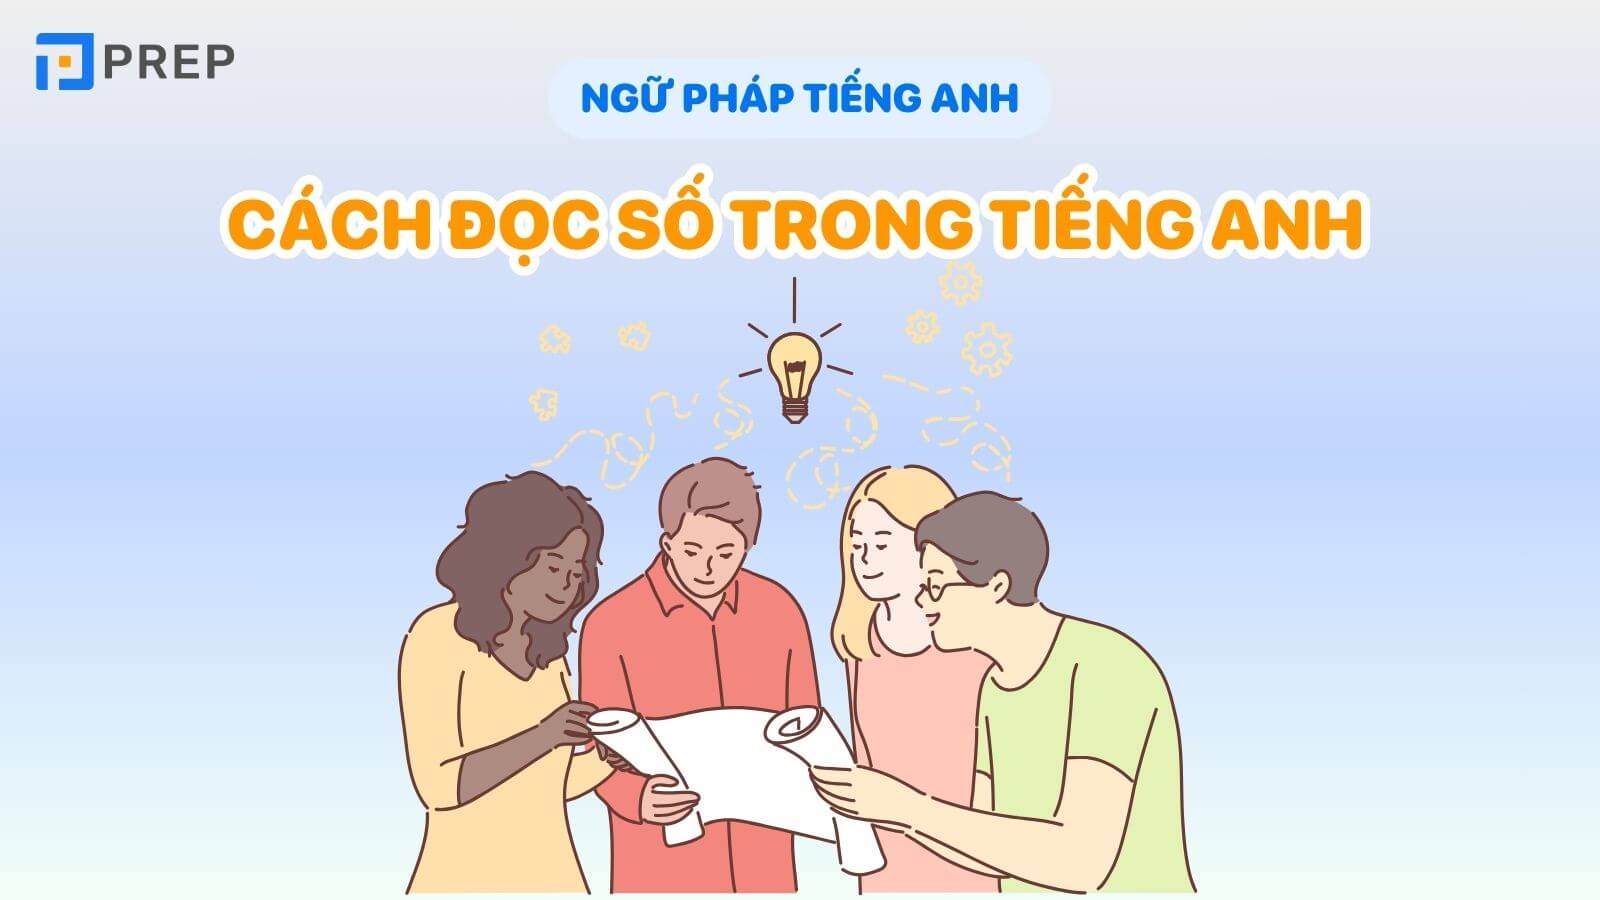 cach-doc-so-trong-tieng-anh.jpg